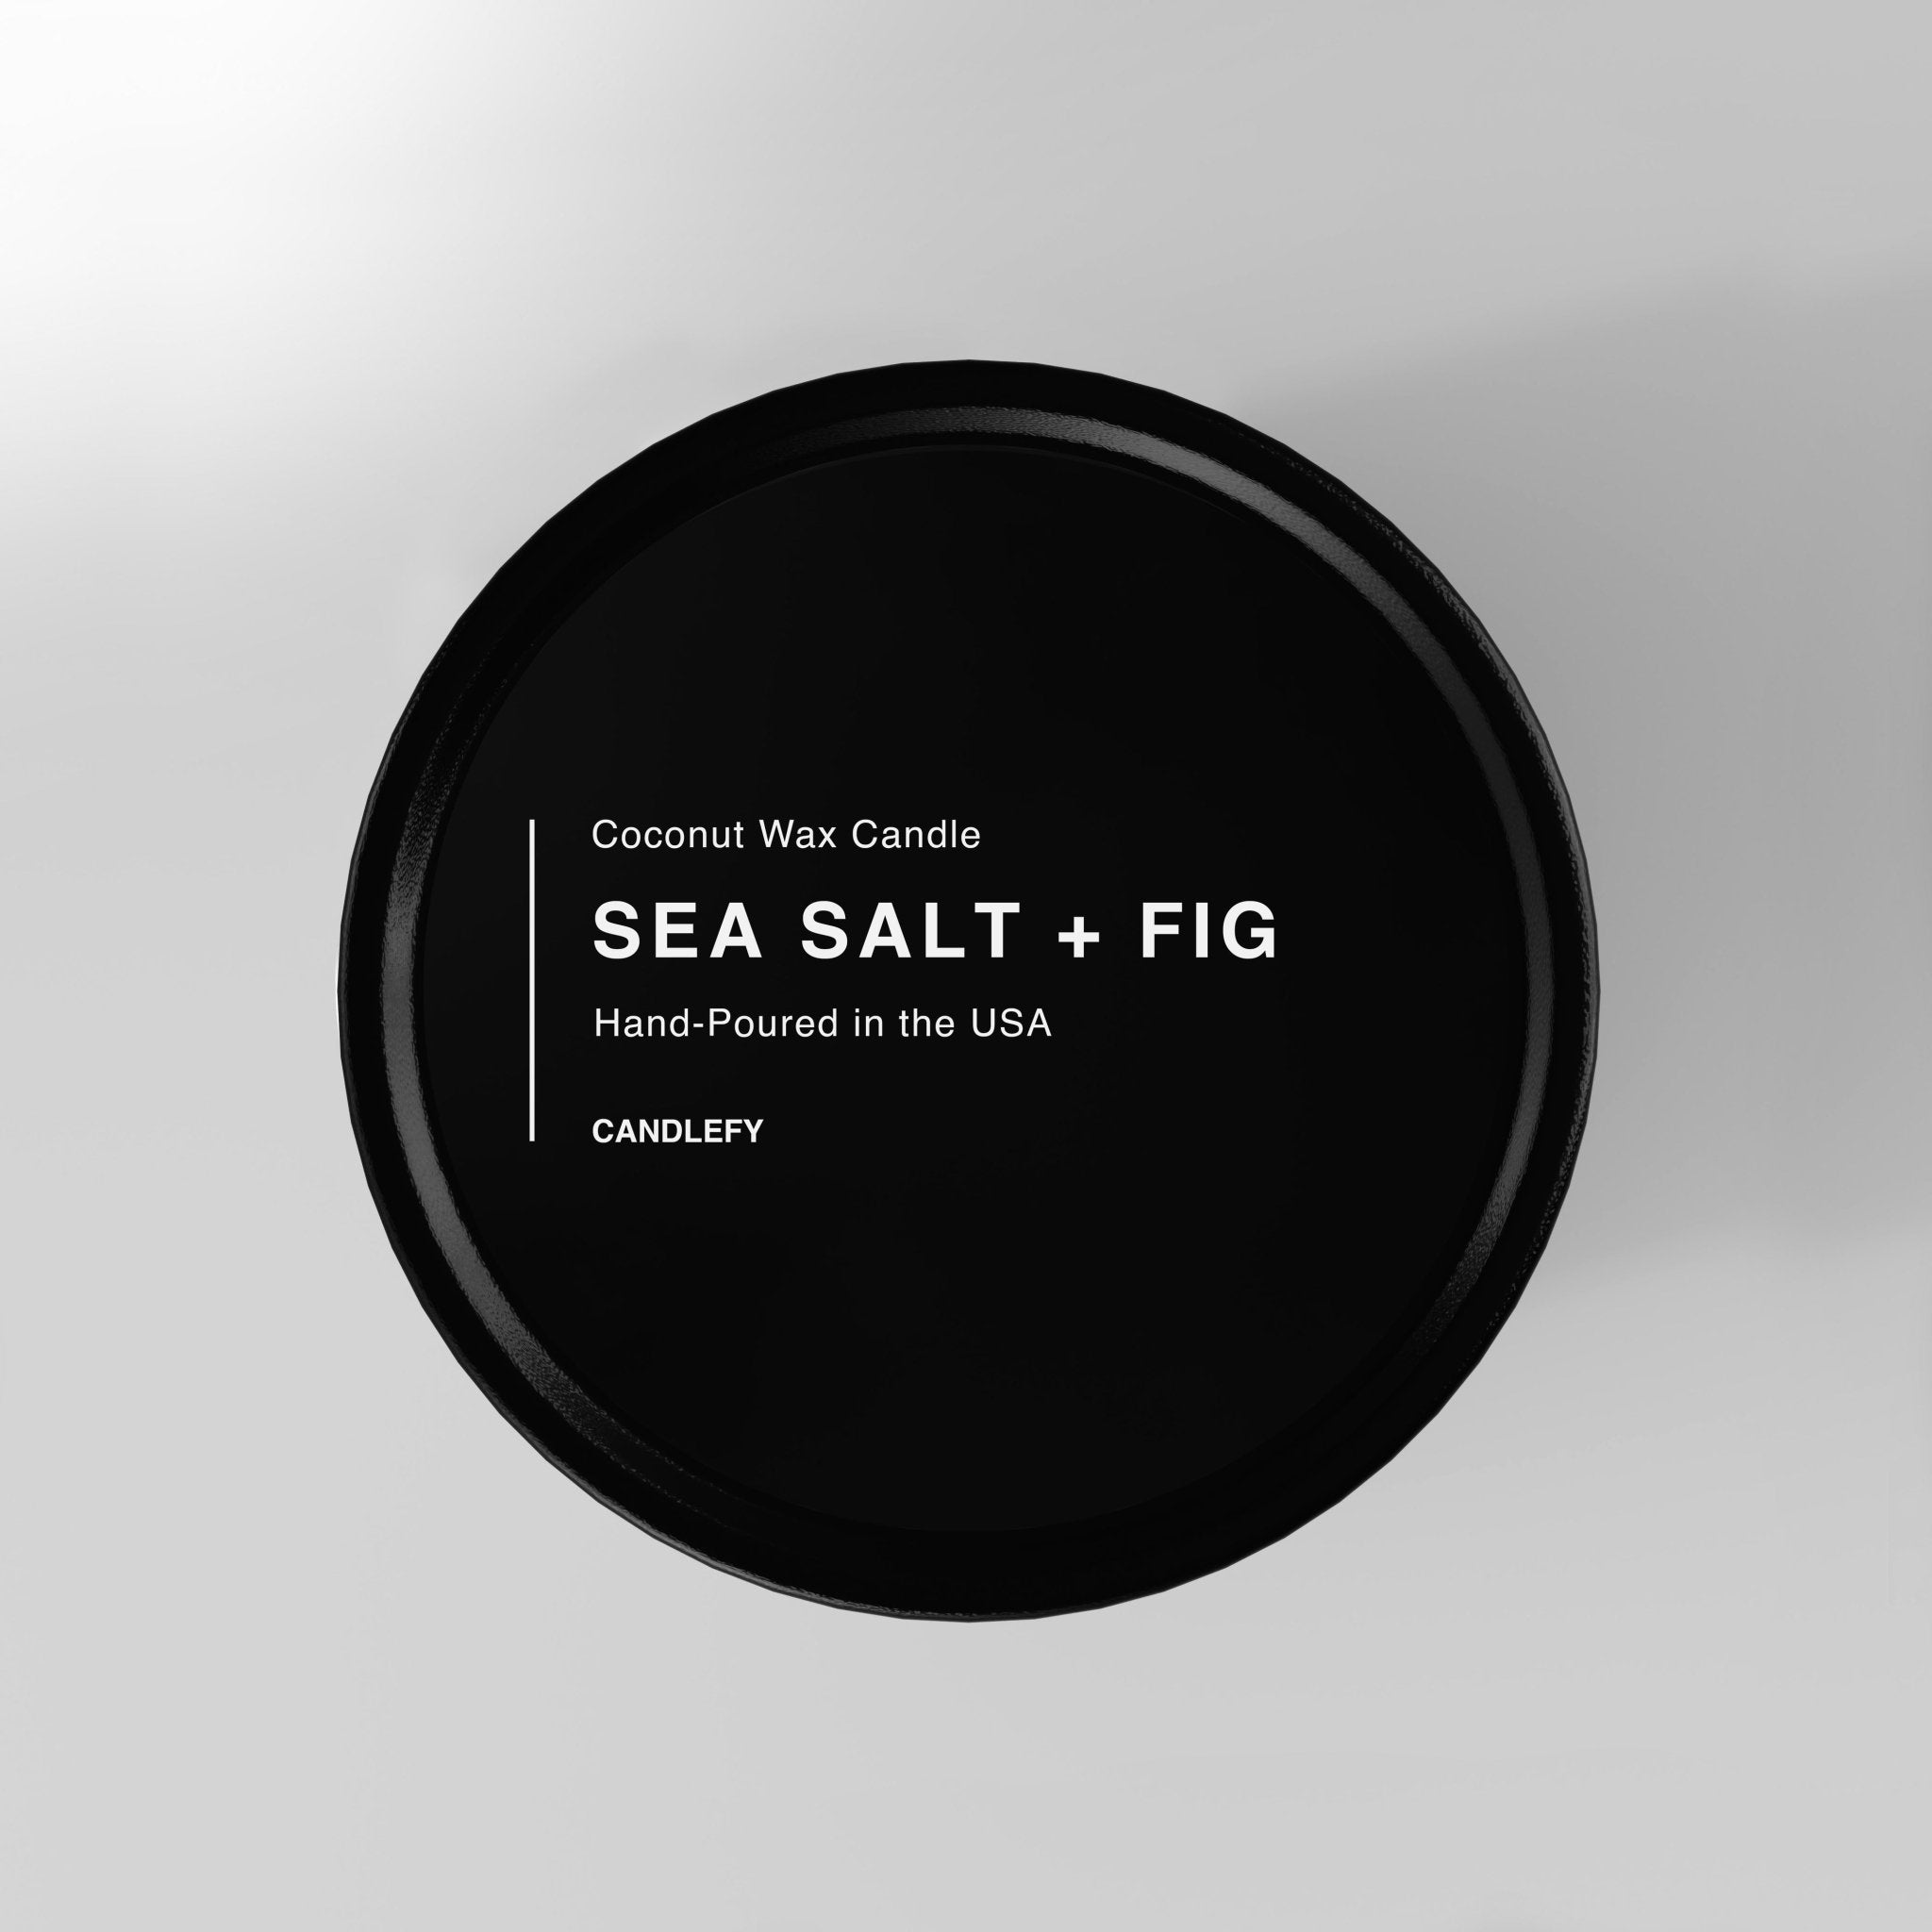 Sea Salt + Fig Natural Wax Scented Candle in Black Travel Tin - Candlefy